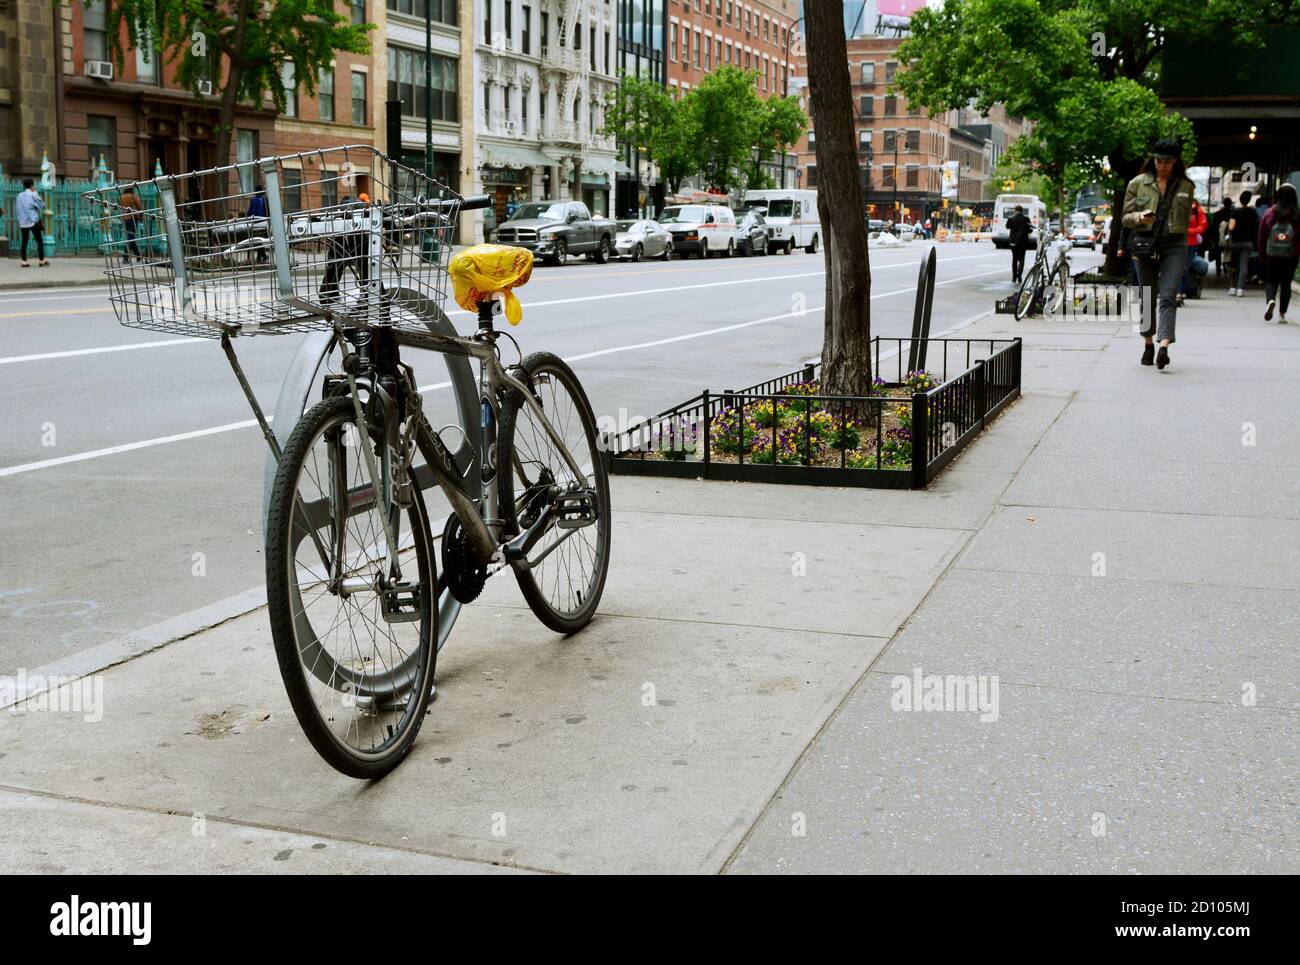 NEW YORK, USA - MAY 10, 2019: Bicycle chained to a stand on West 14th Street in downtown New York City on May 10, 2019. Pedestrians walk along the sid Stock Photo